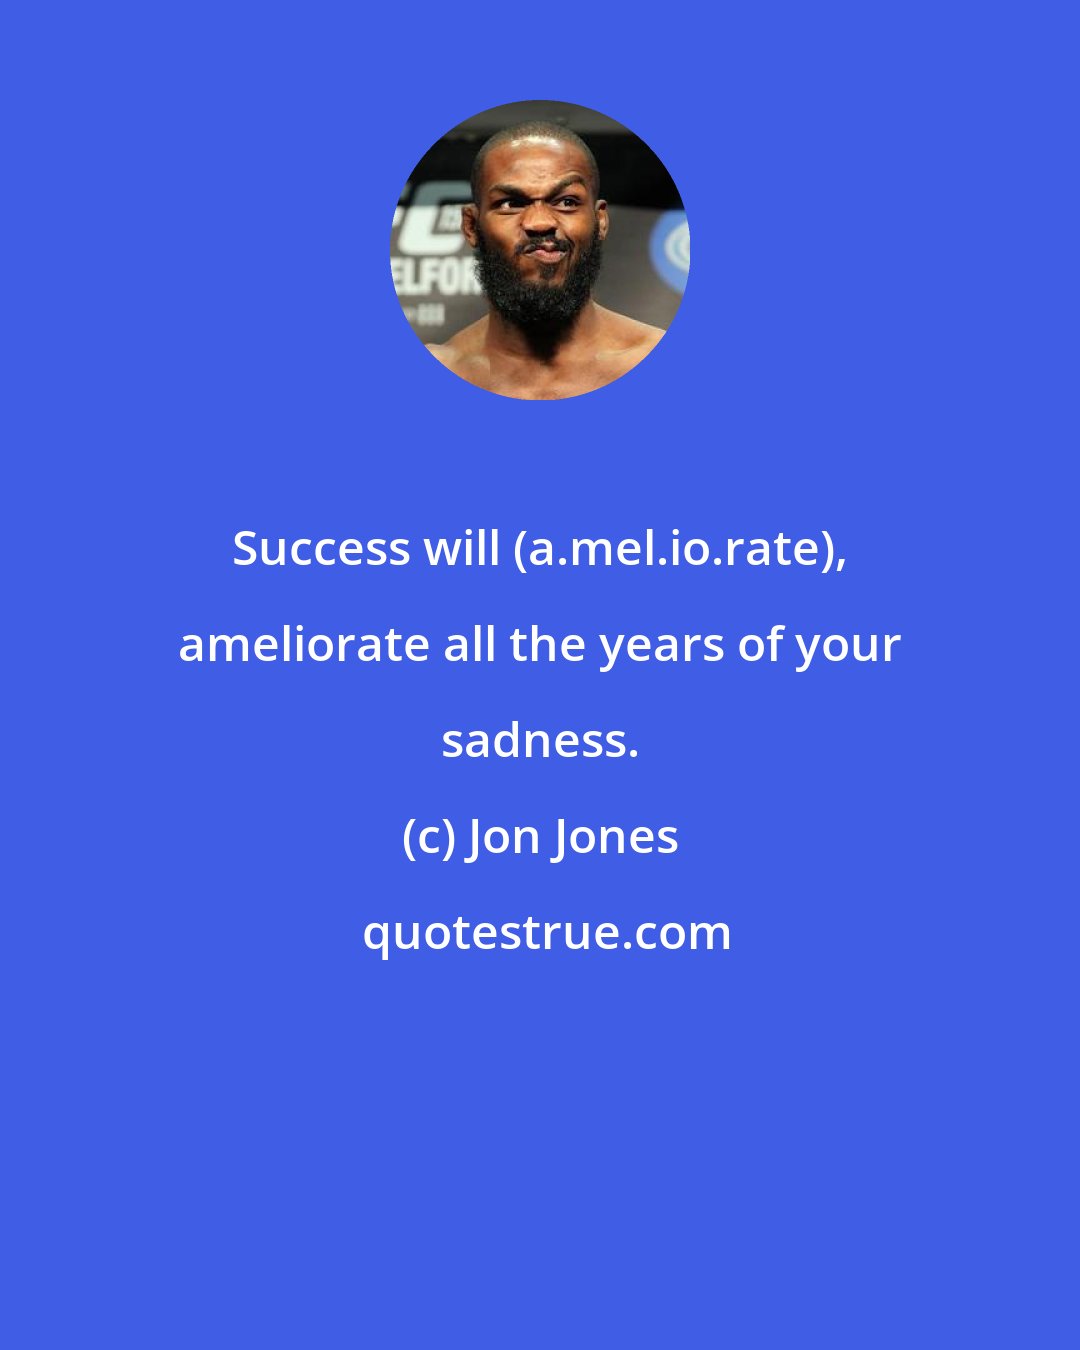 Jon Jones: Success will (a.mel.io.rate), ameliorate all the years of your sadness.